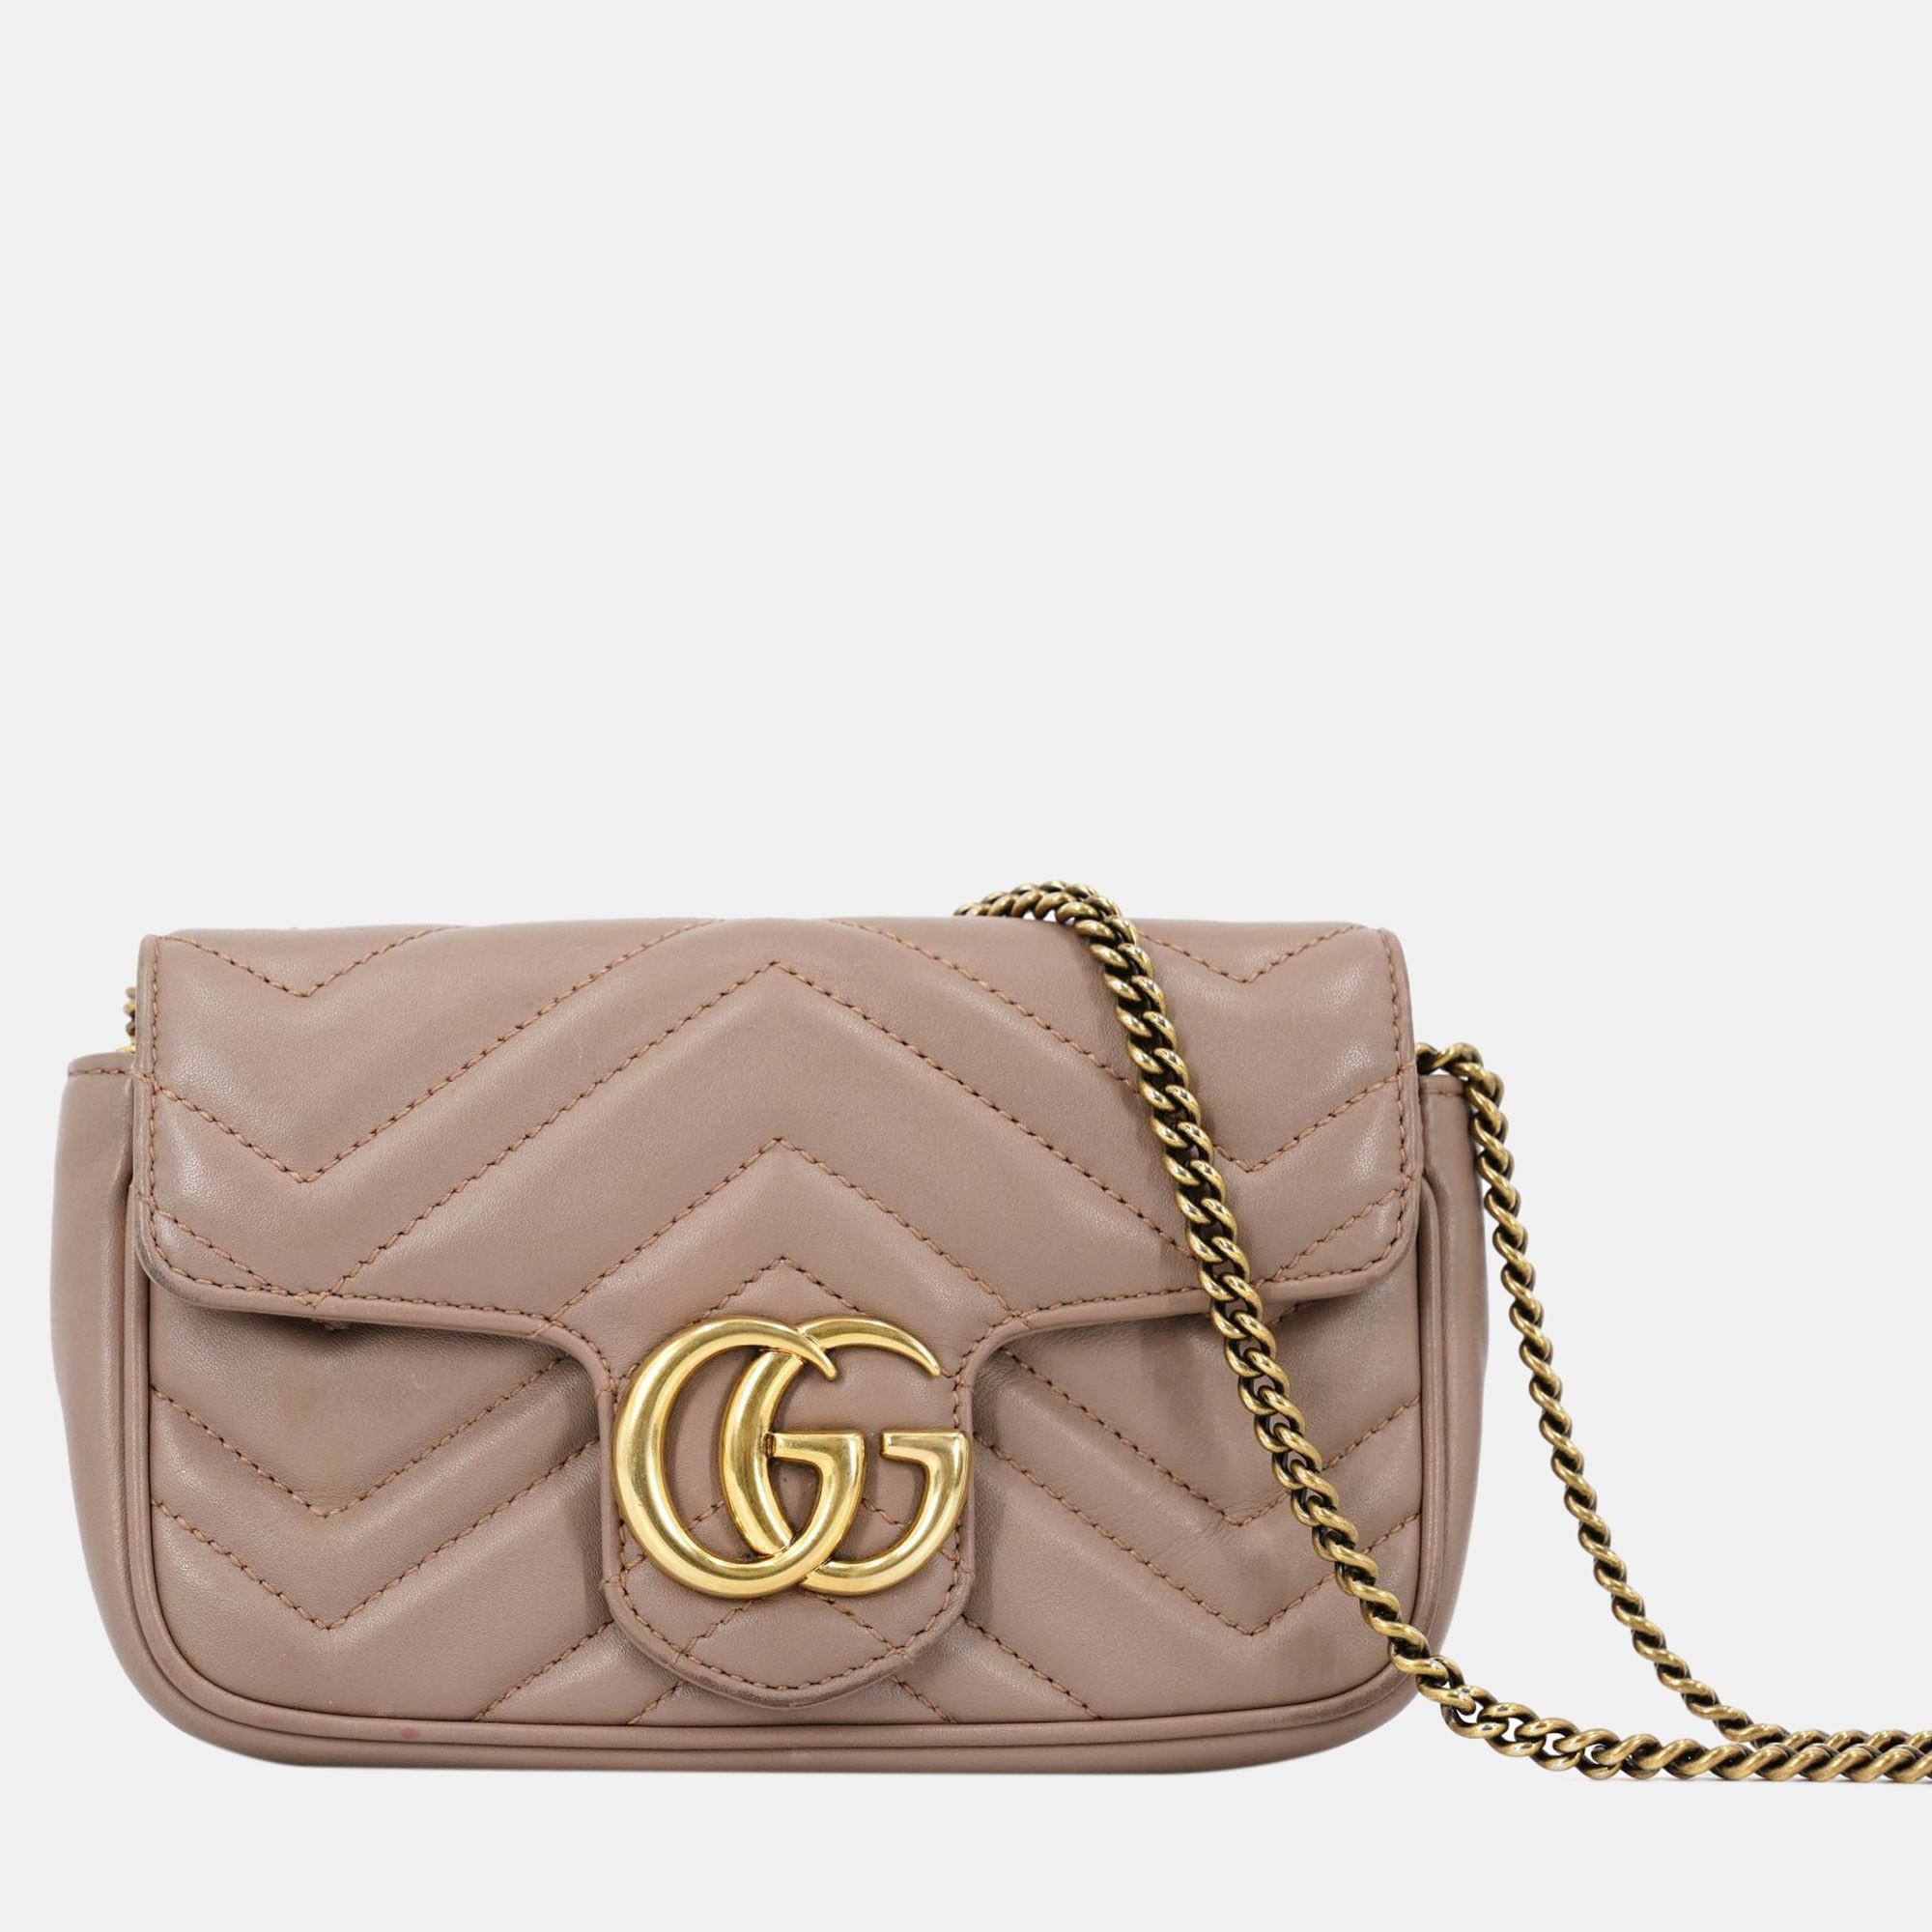 Pre-owned Gucci Pink Leather Super Mini Gg Marmont Shoulder Bag